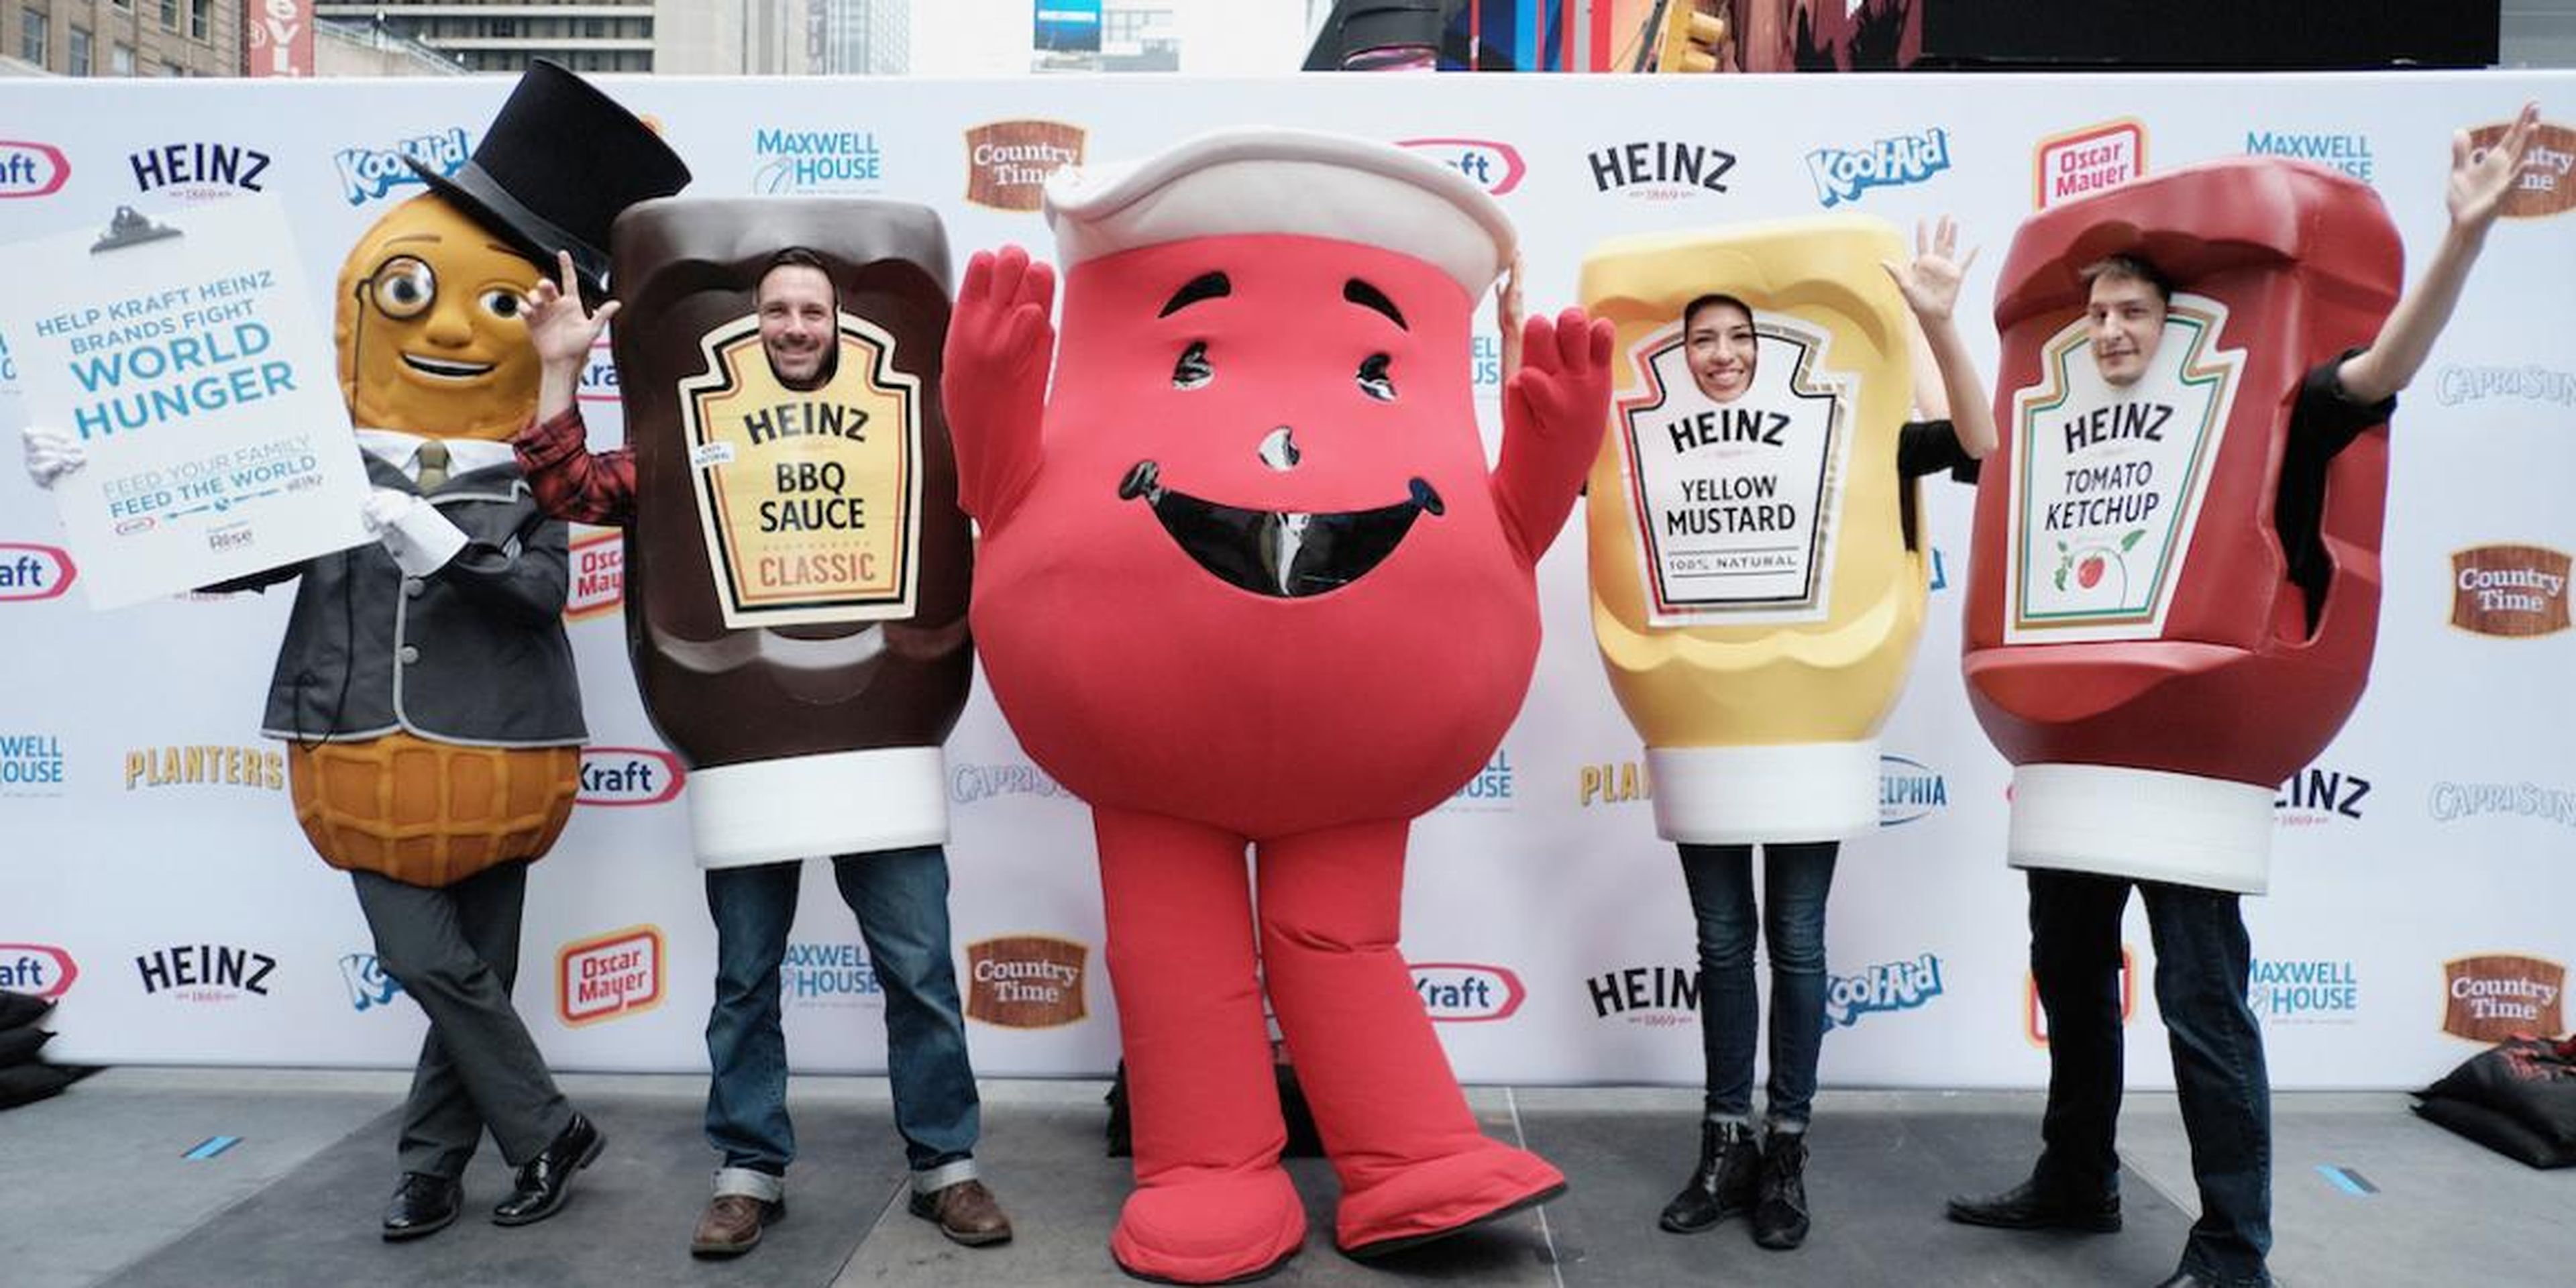 Kool-Aid Man, Mr. Peanut, and The Ketchups in New York City's Times Square in 2017 during the kick-off event for the Feed Your Family, Feed The World program.